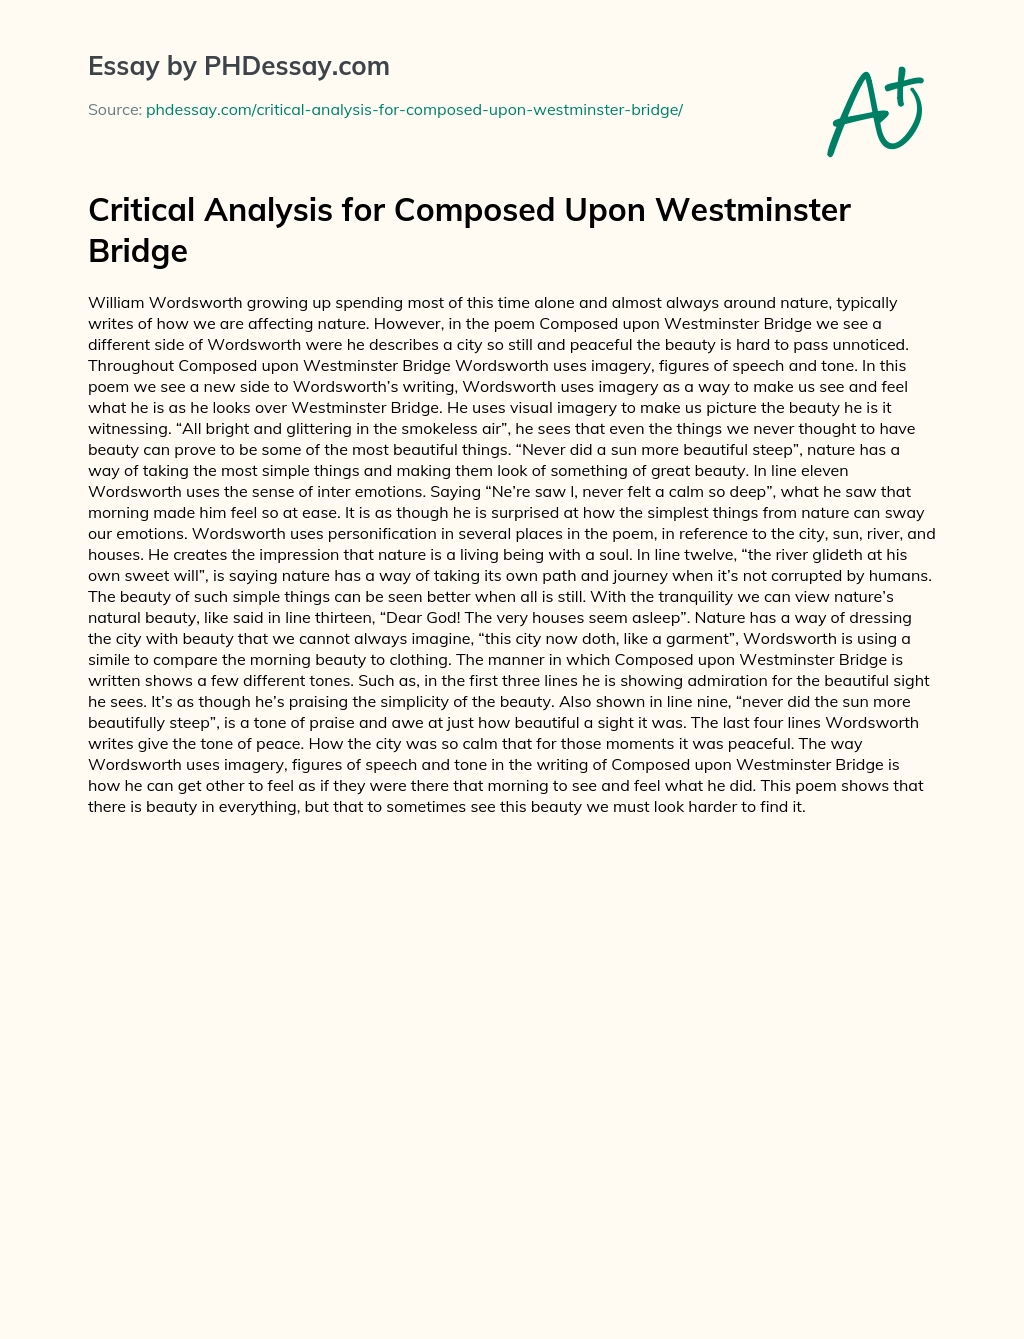 Critical Analysis for Composed Upon Westminster Bridge essay